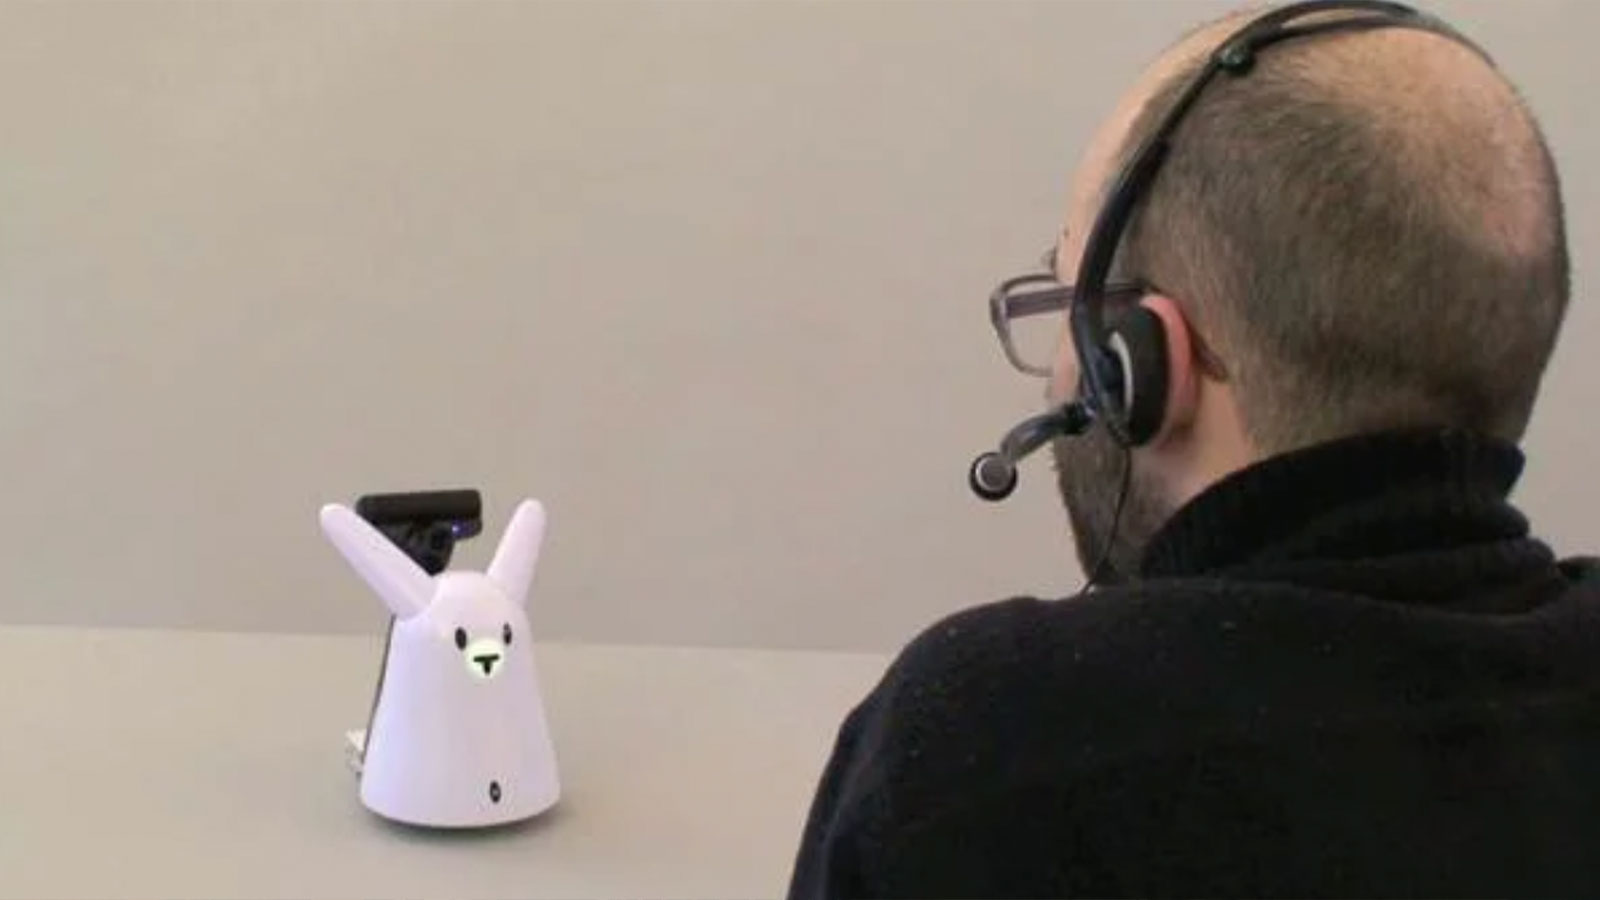 Intuity Tech Research: Remixing voice recognition with face detection – or how to talk to white rabbits